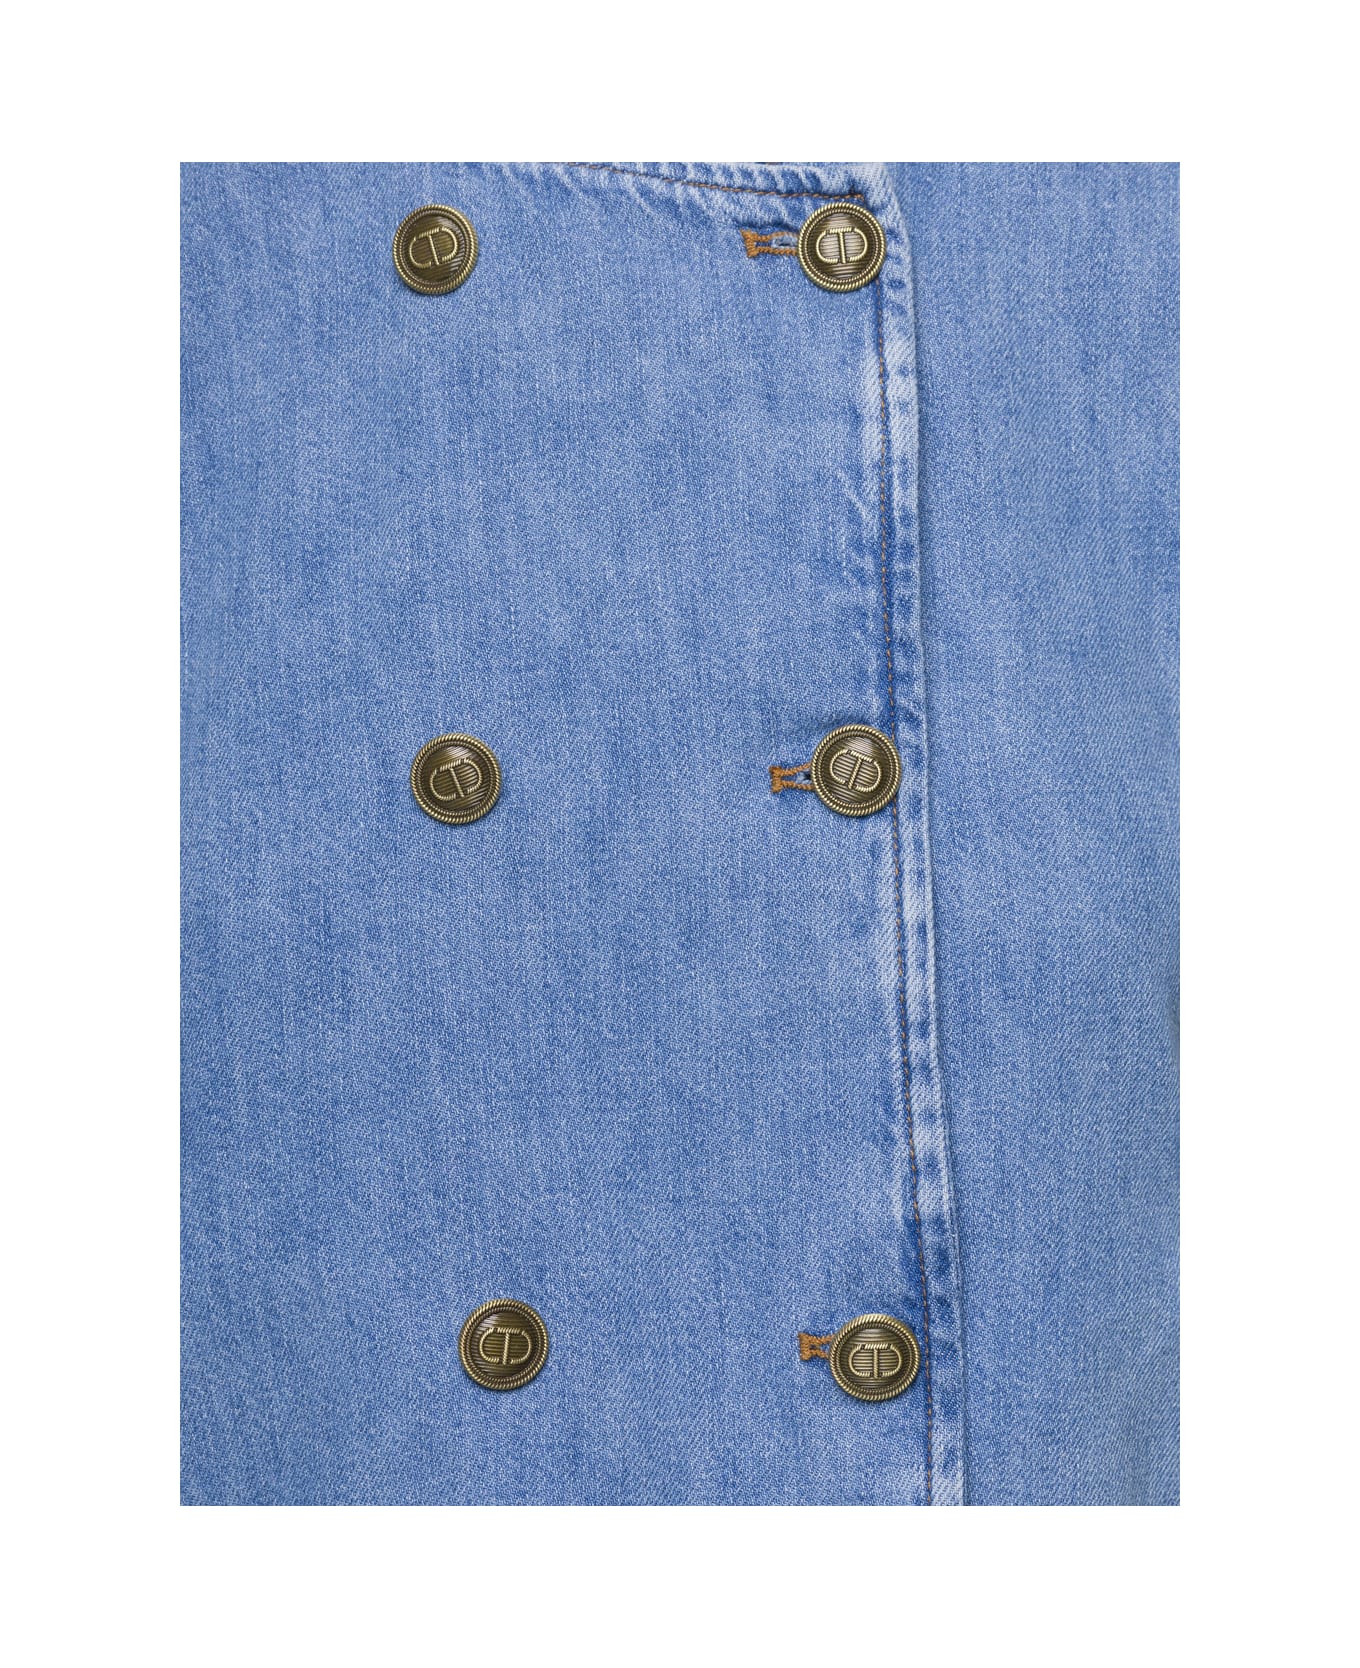 TwinSet Light Blue Denim Crewneck Jacket With Buttons In Cotton Woman - Blu